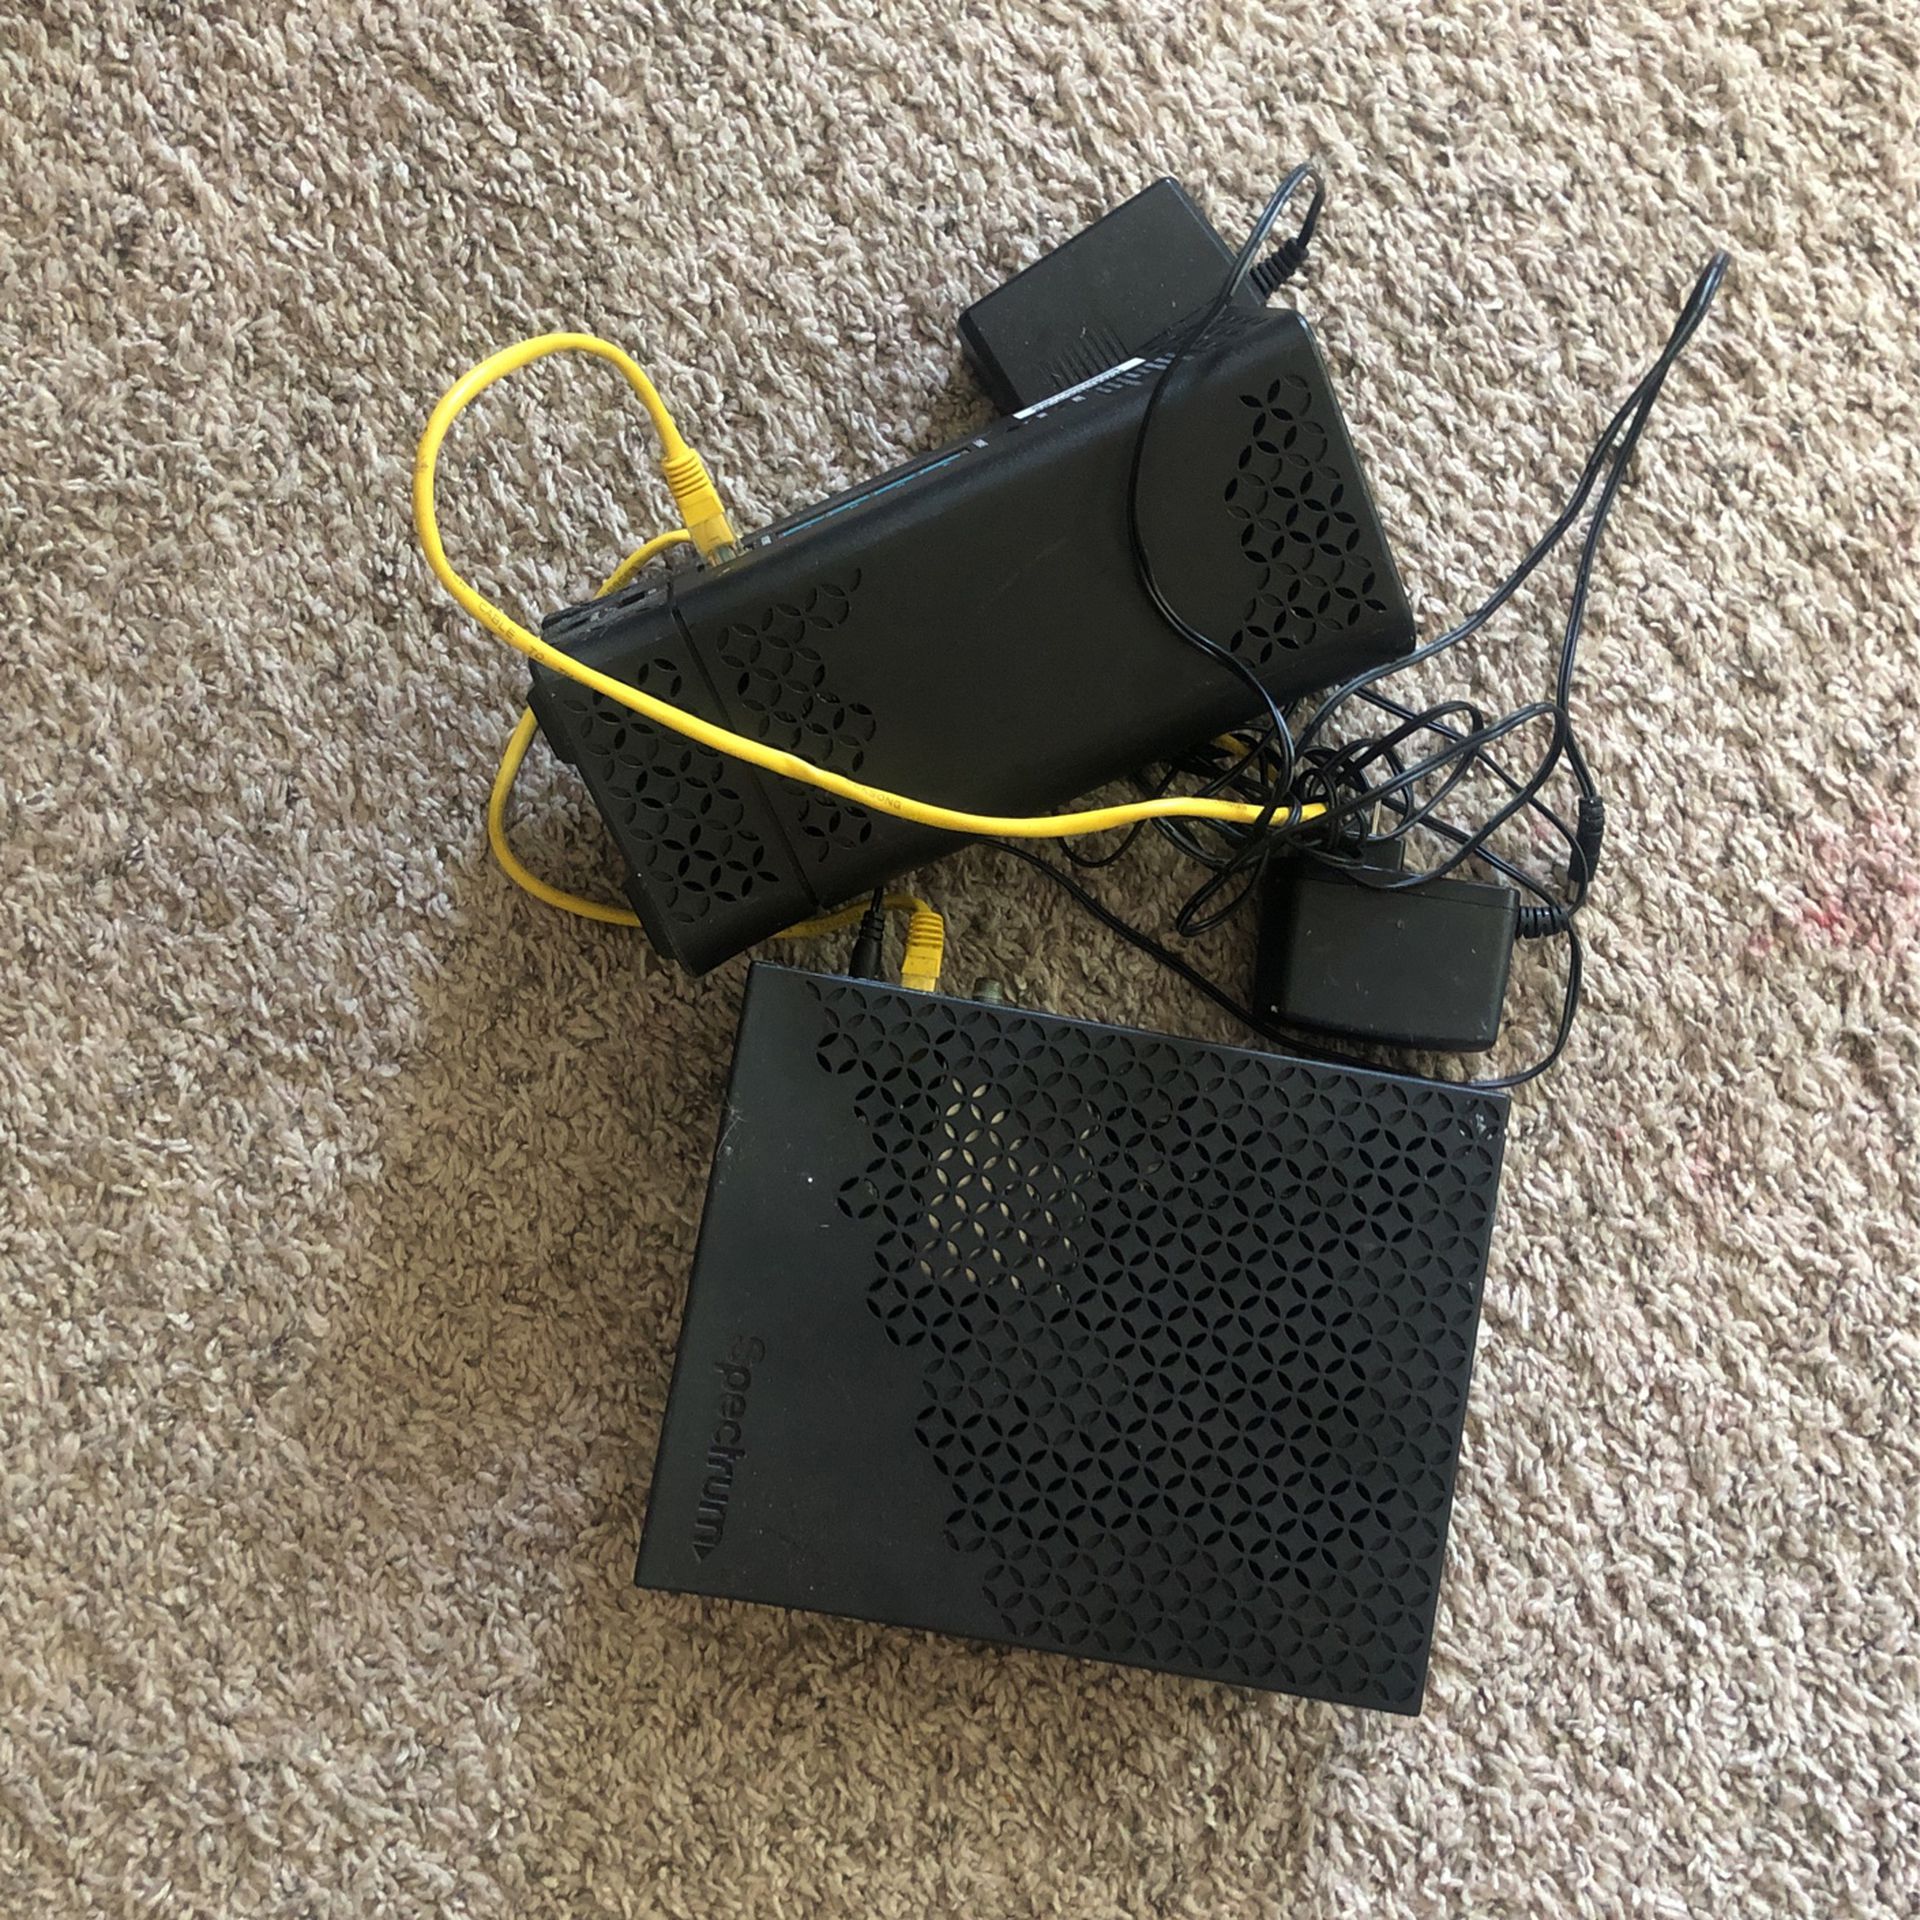 Spectrum Modem And Router 